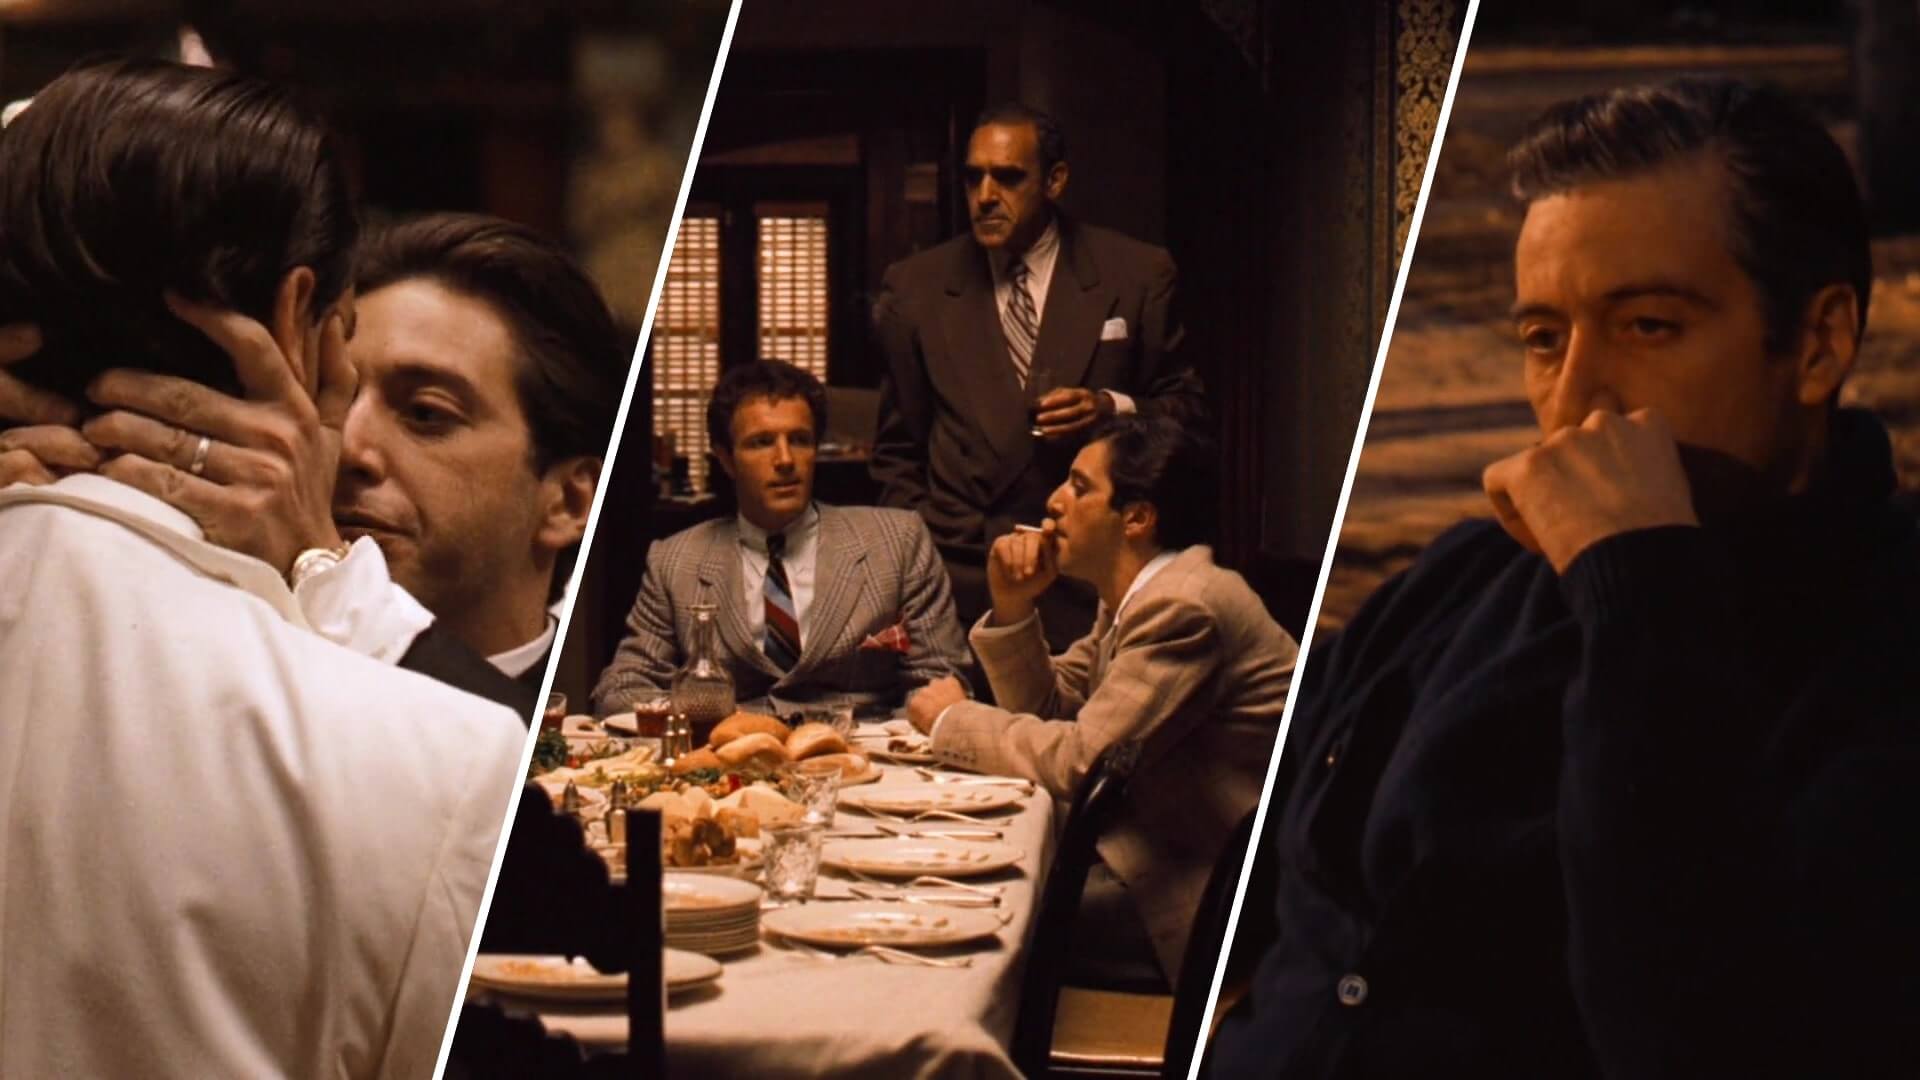 The Godfather 2 Ending Explained (& Why It’s One of the Best)